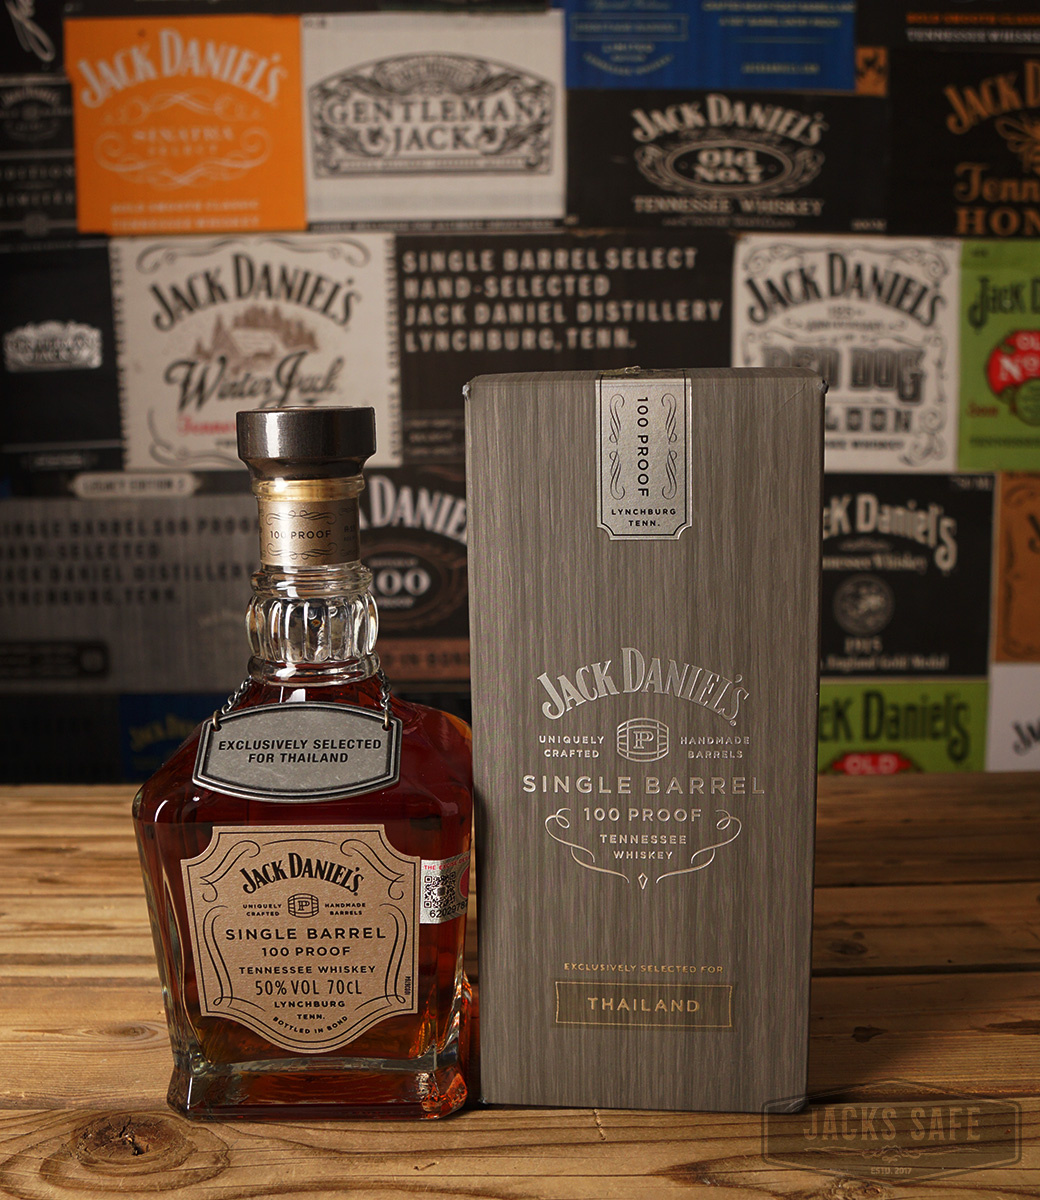 JACK DANIEL'S - Single Barrel - 100 Proof - PC - SELECTED FOR THAILAND - 700ML - TAG - EXCISE STICKER